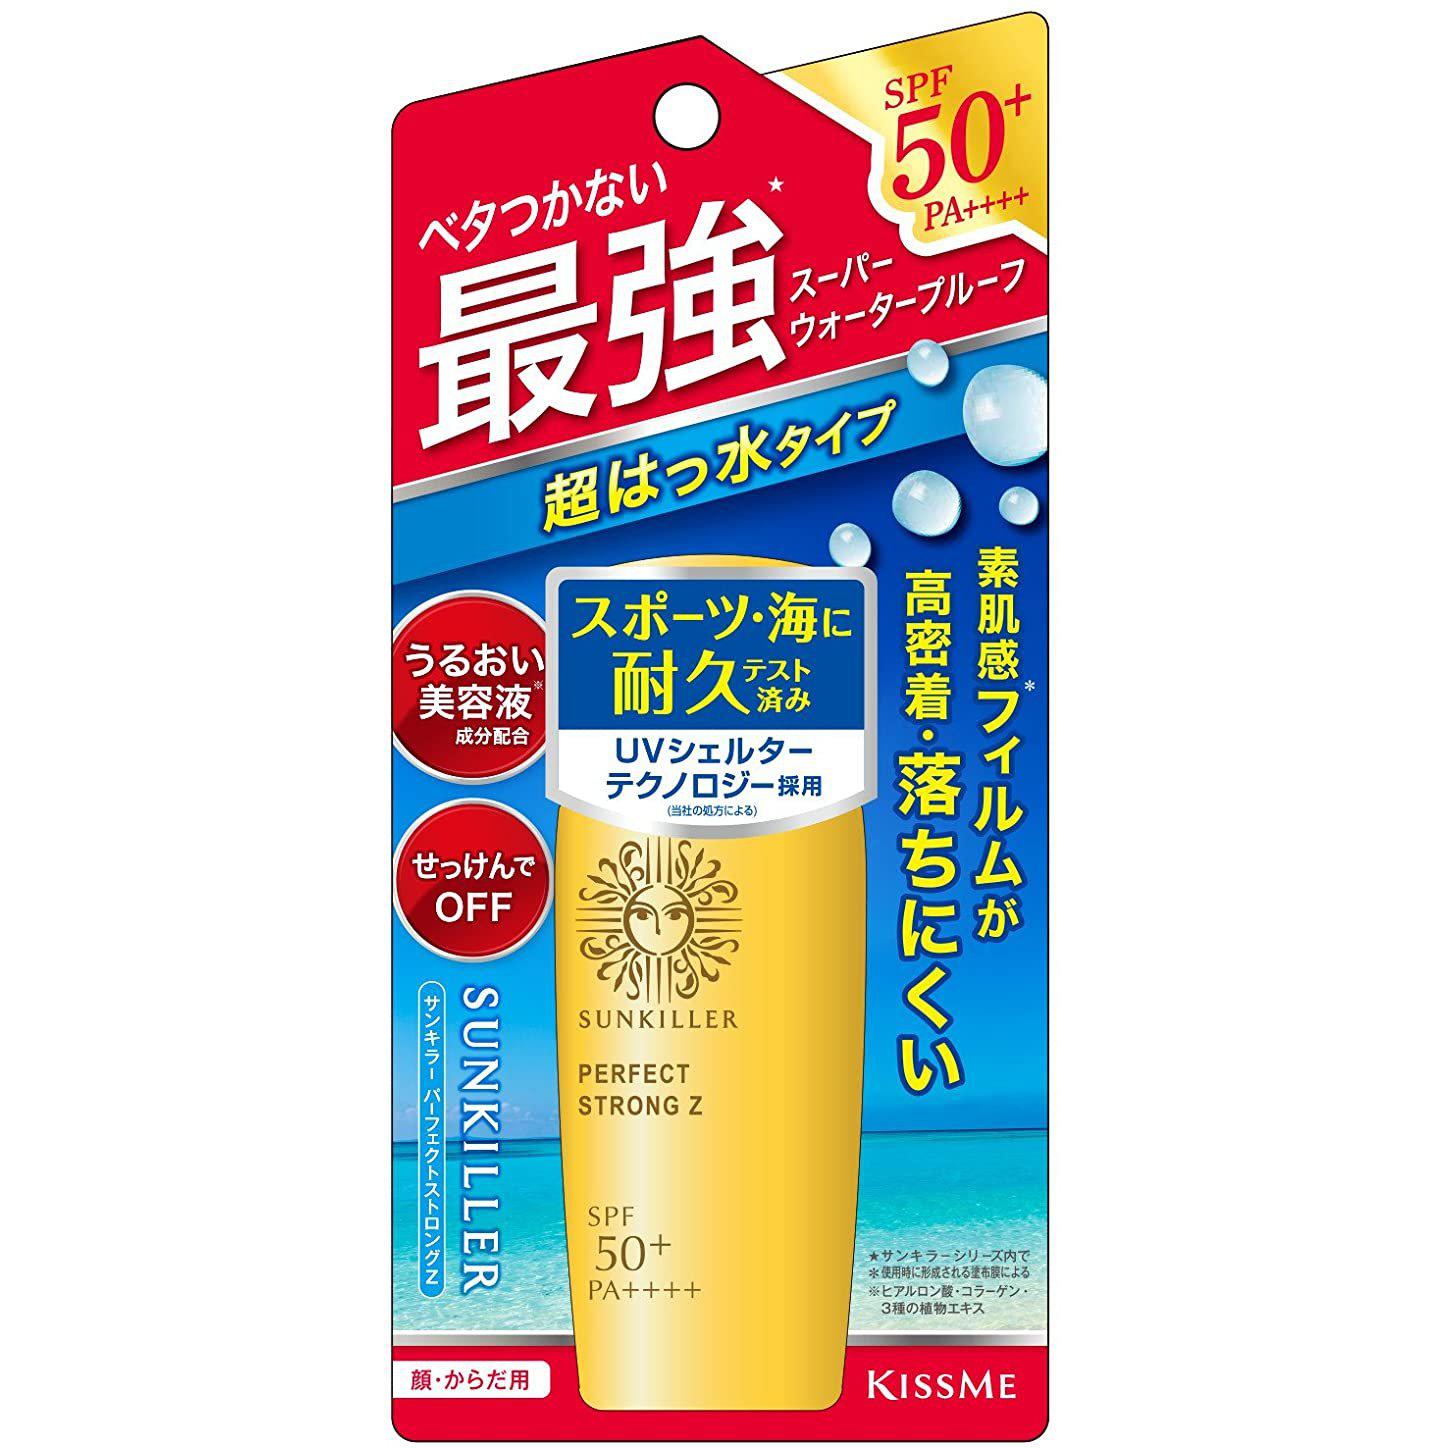 Isehan Sunkiller Perfect Strong Z Sunscreen SPF50+ PA++++ 30ml